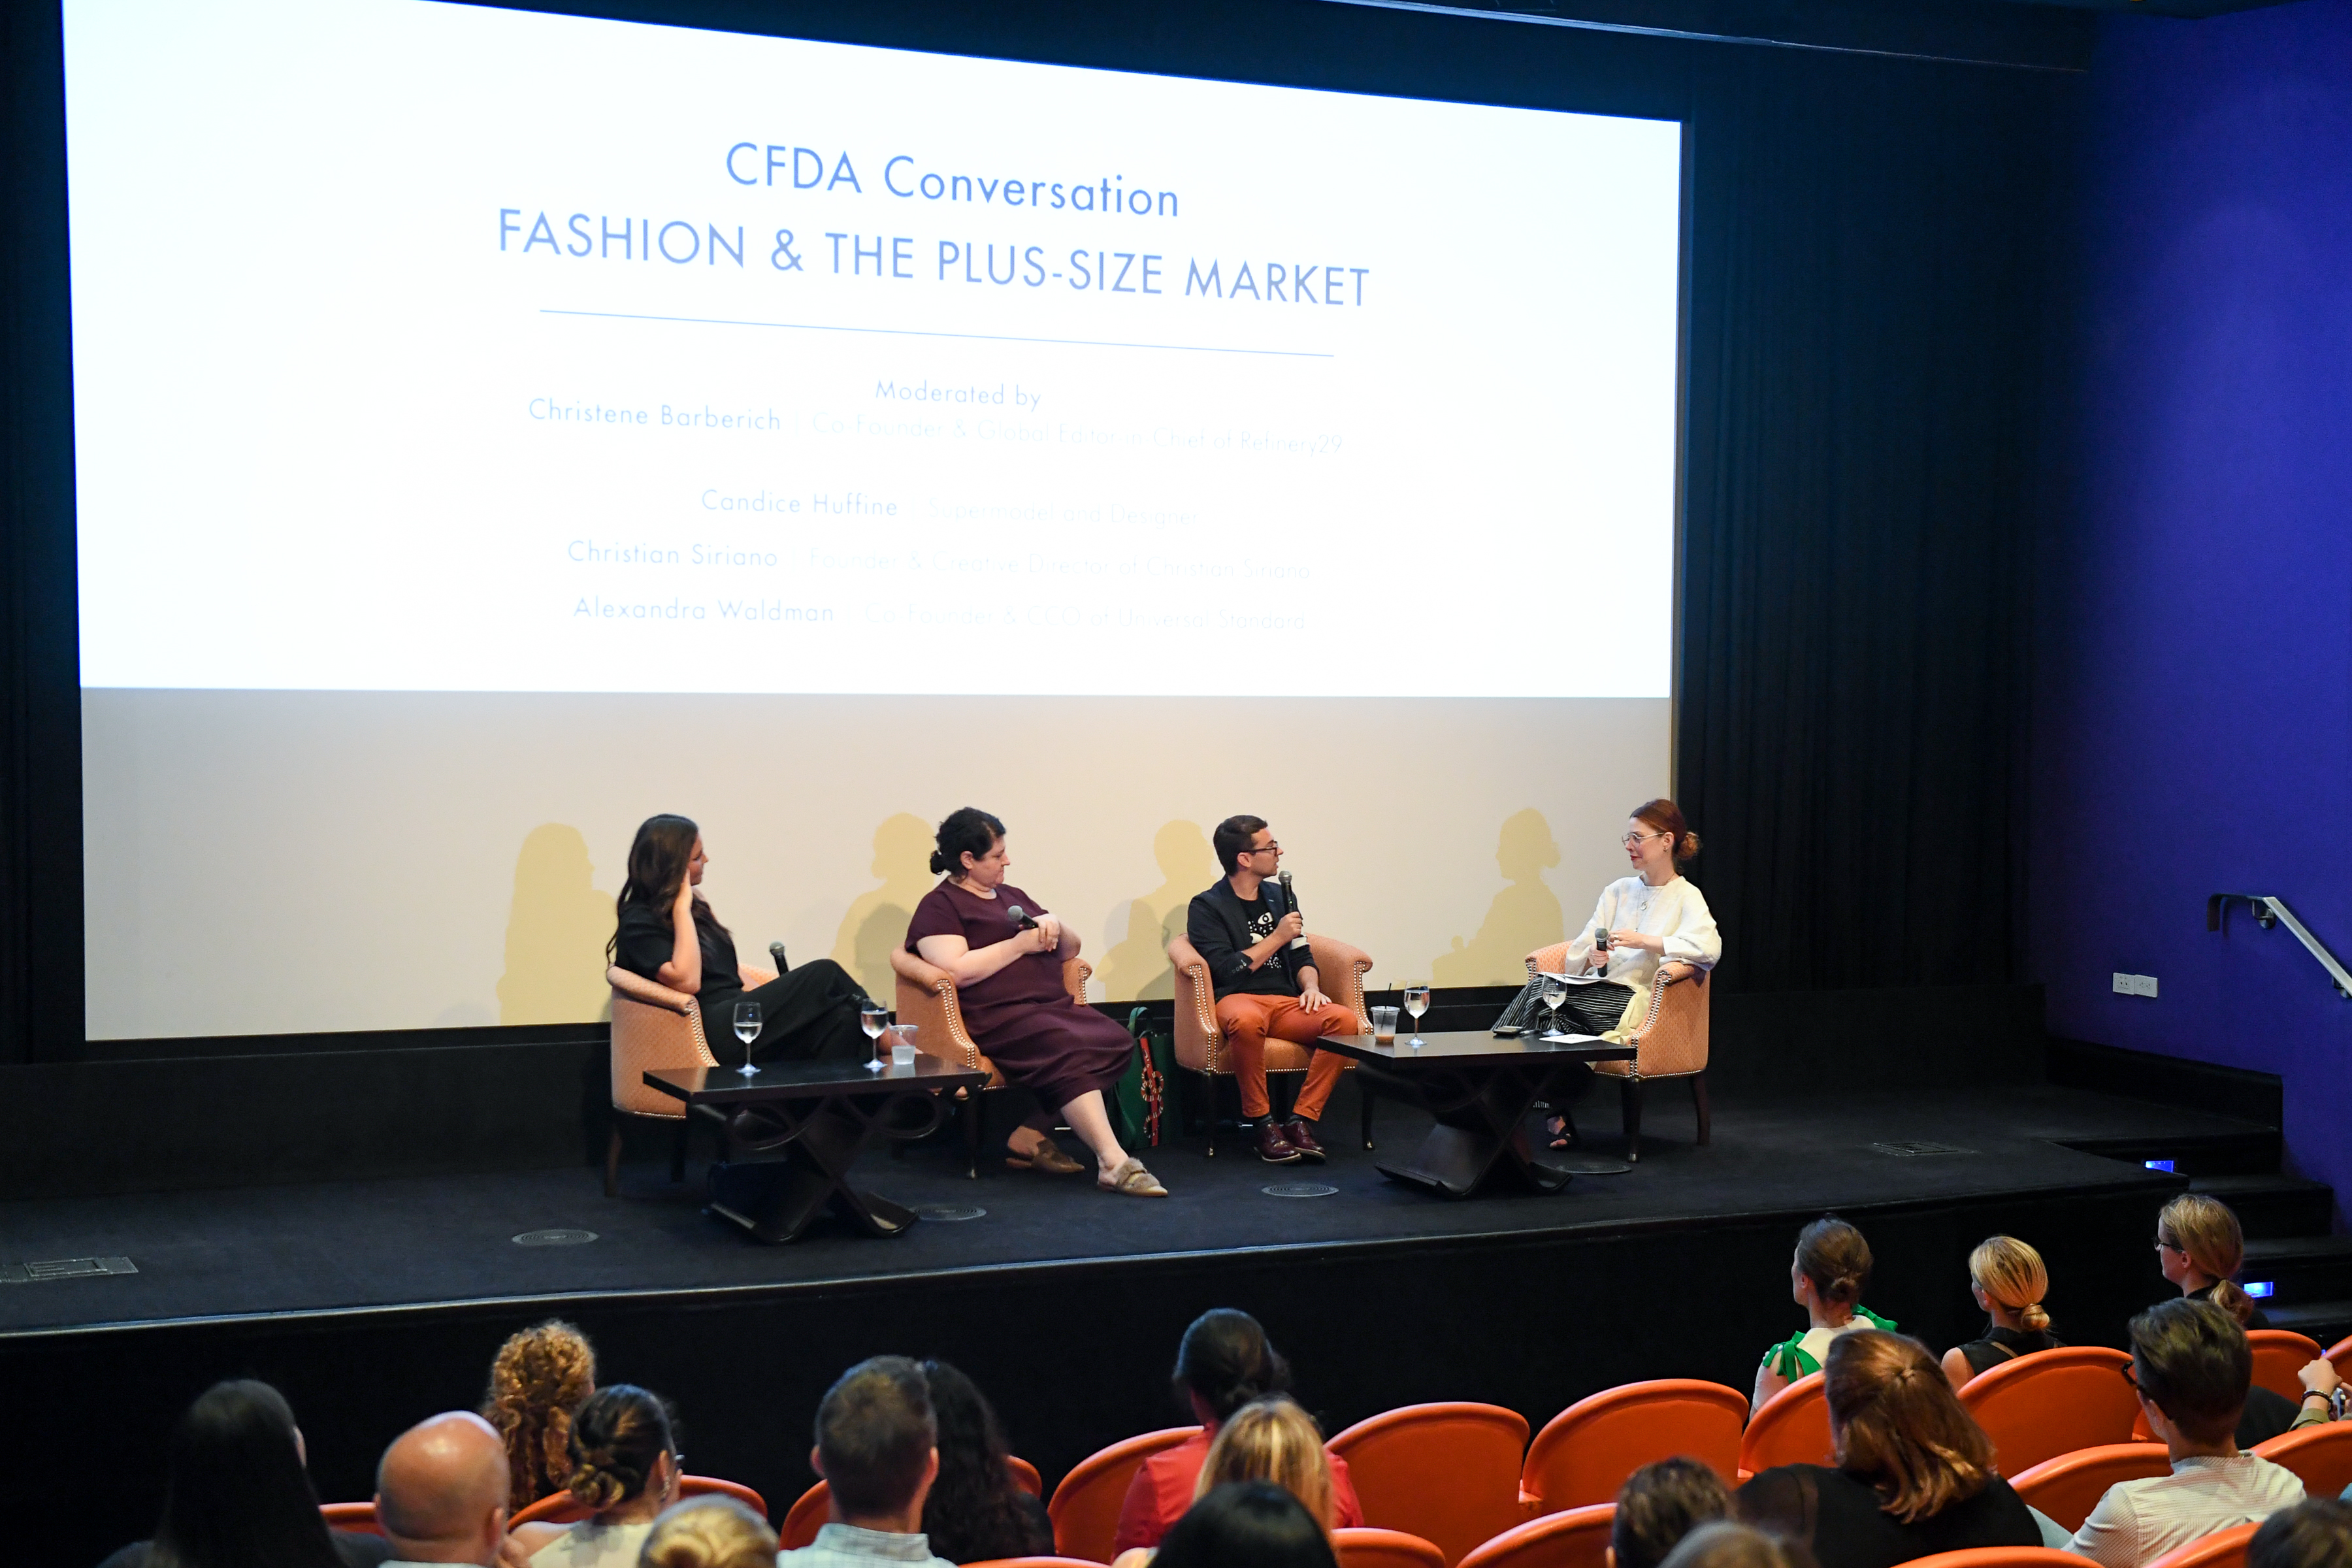 Plus-Size and Fashion in Focus at CFDA Conversation, News